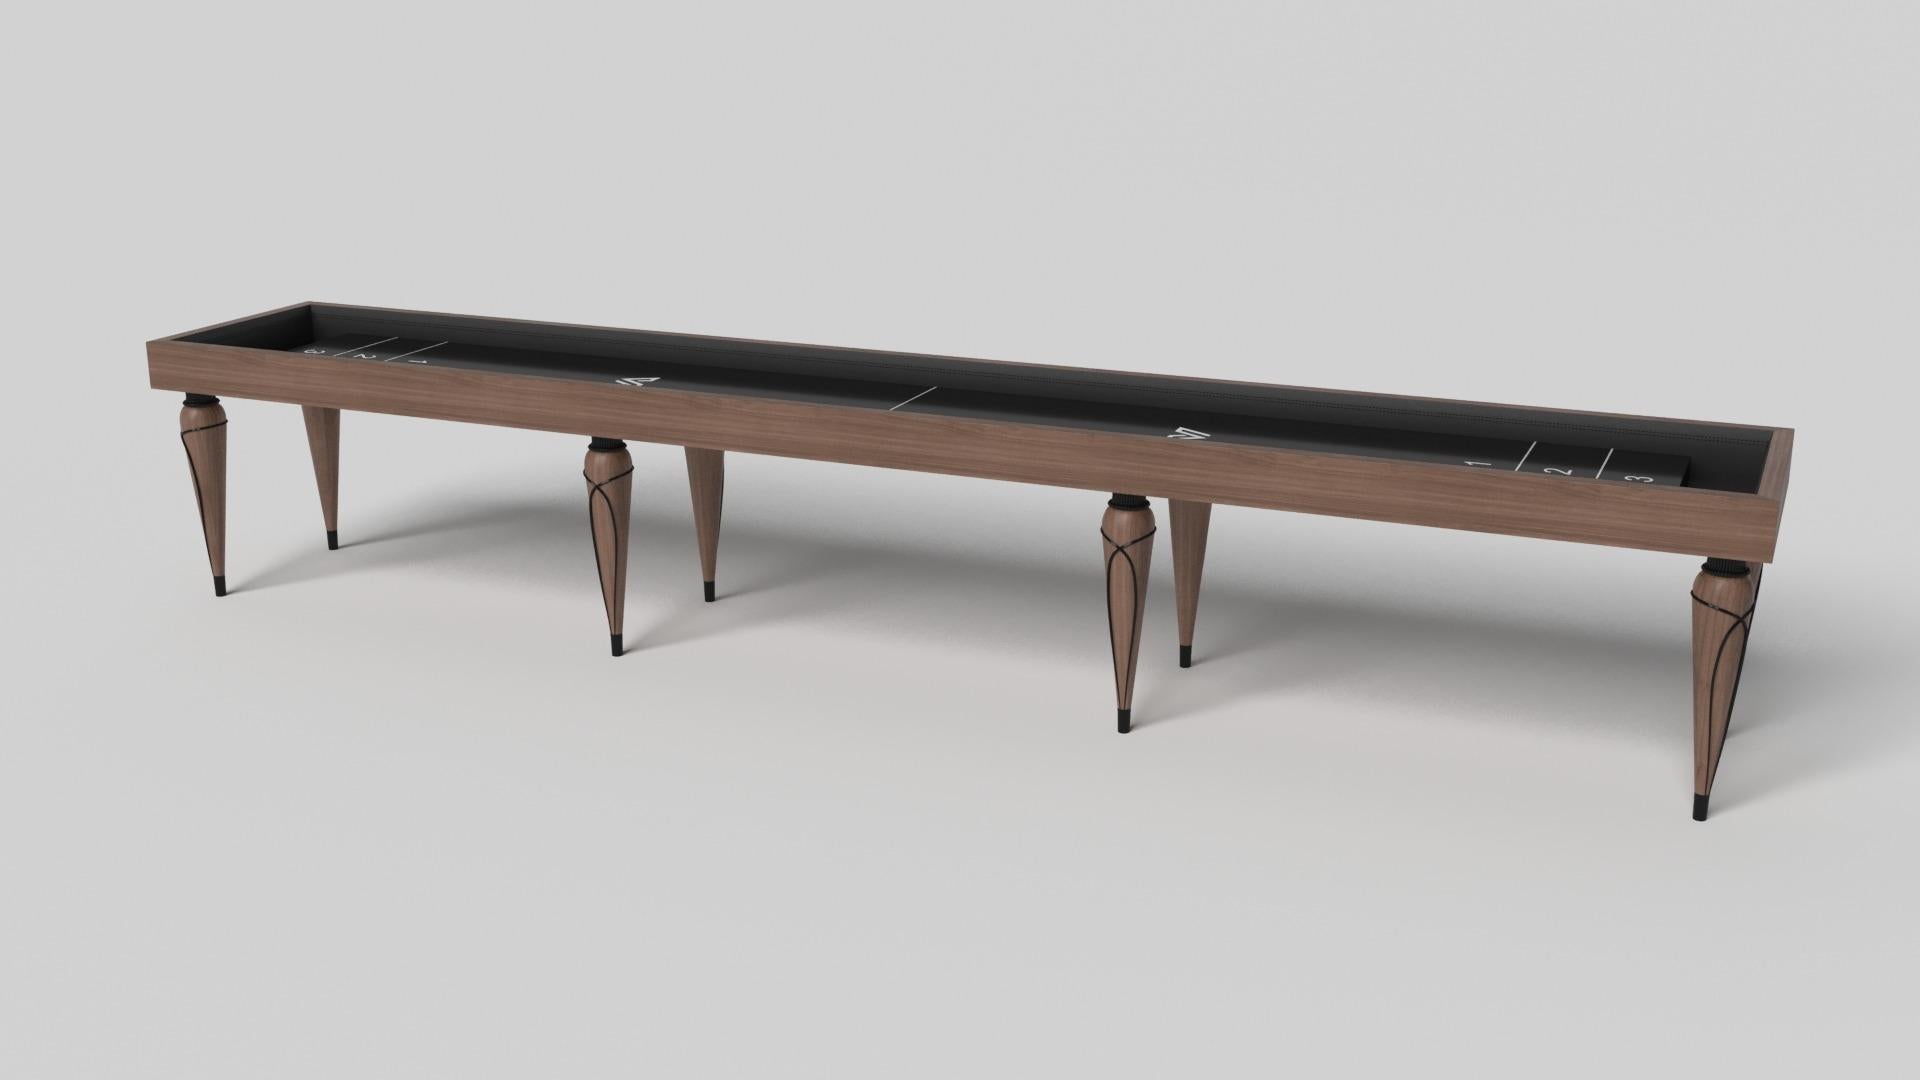 Champagne gold accents add undeniable elegance to this luxury shuffleboard table. Offering superior playability and uncompromised style, this design features hand carved details, decorative metal elements, and metal sabots at the bottom of each leg.